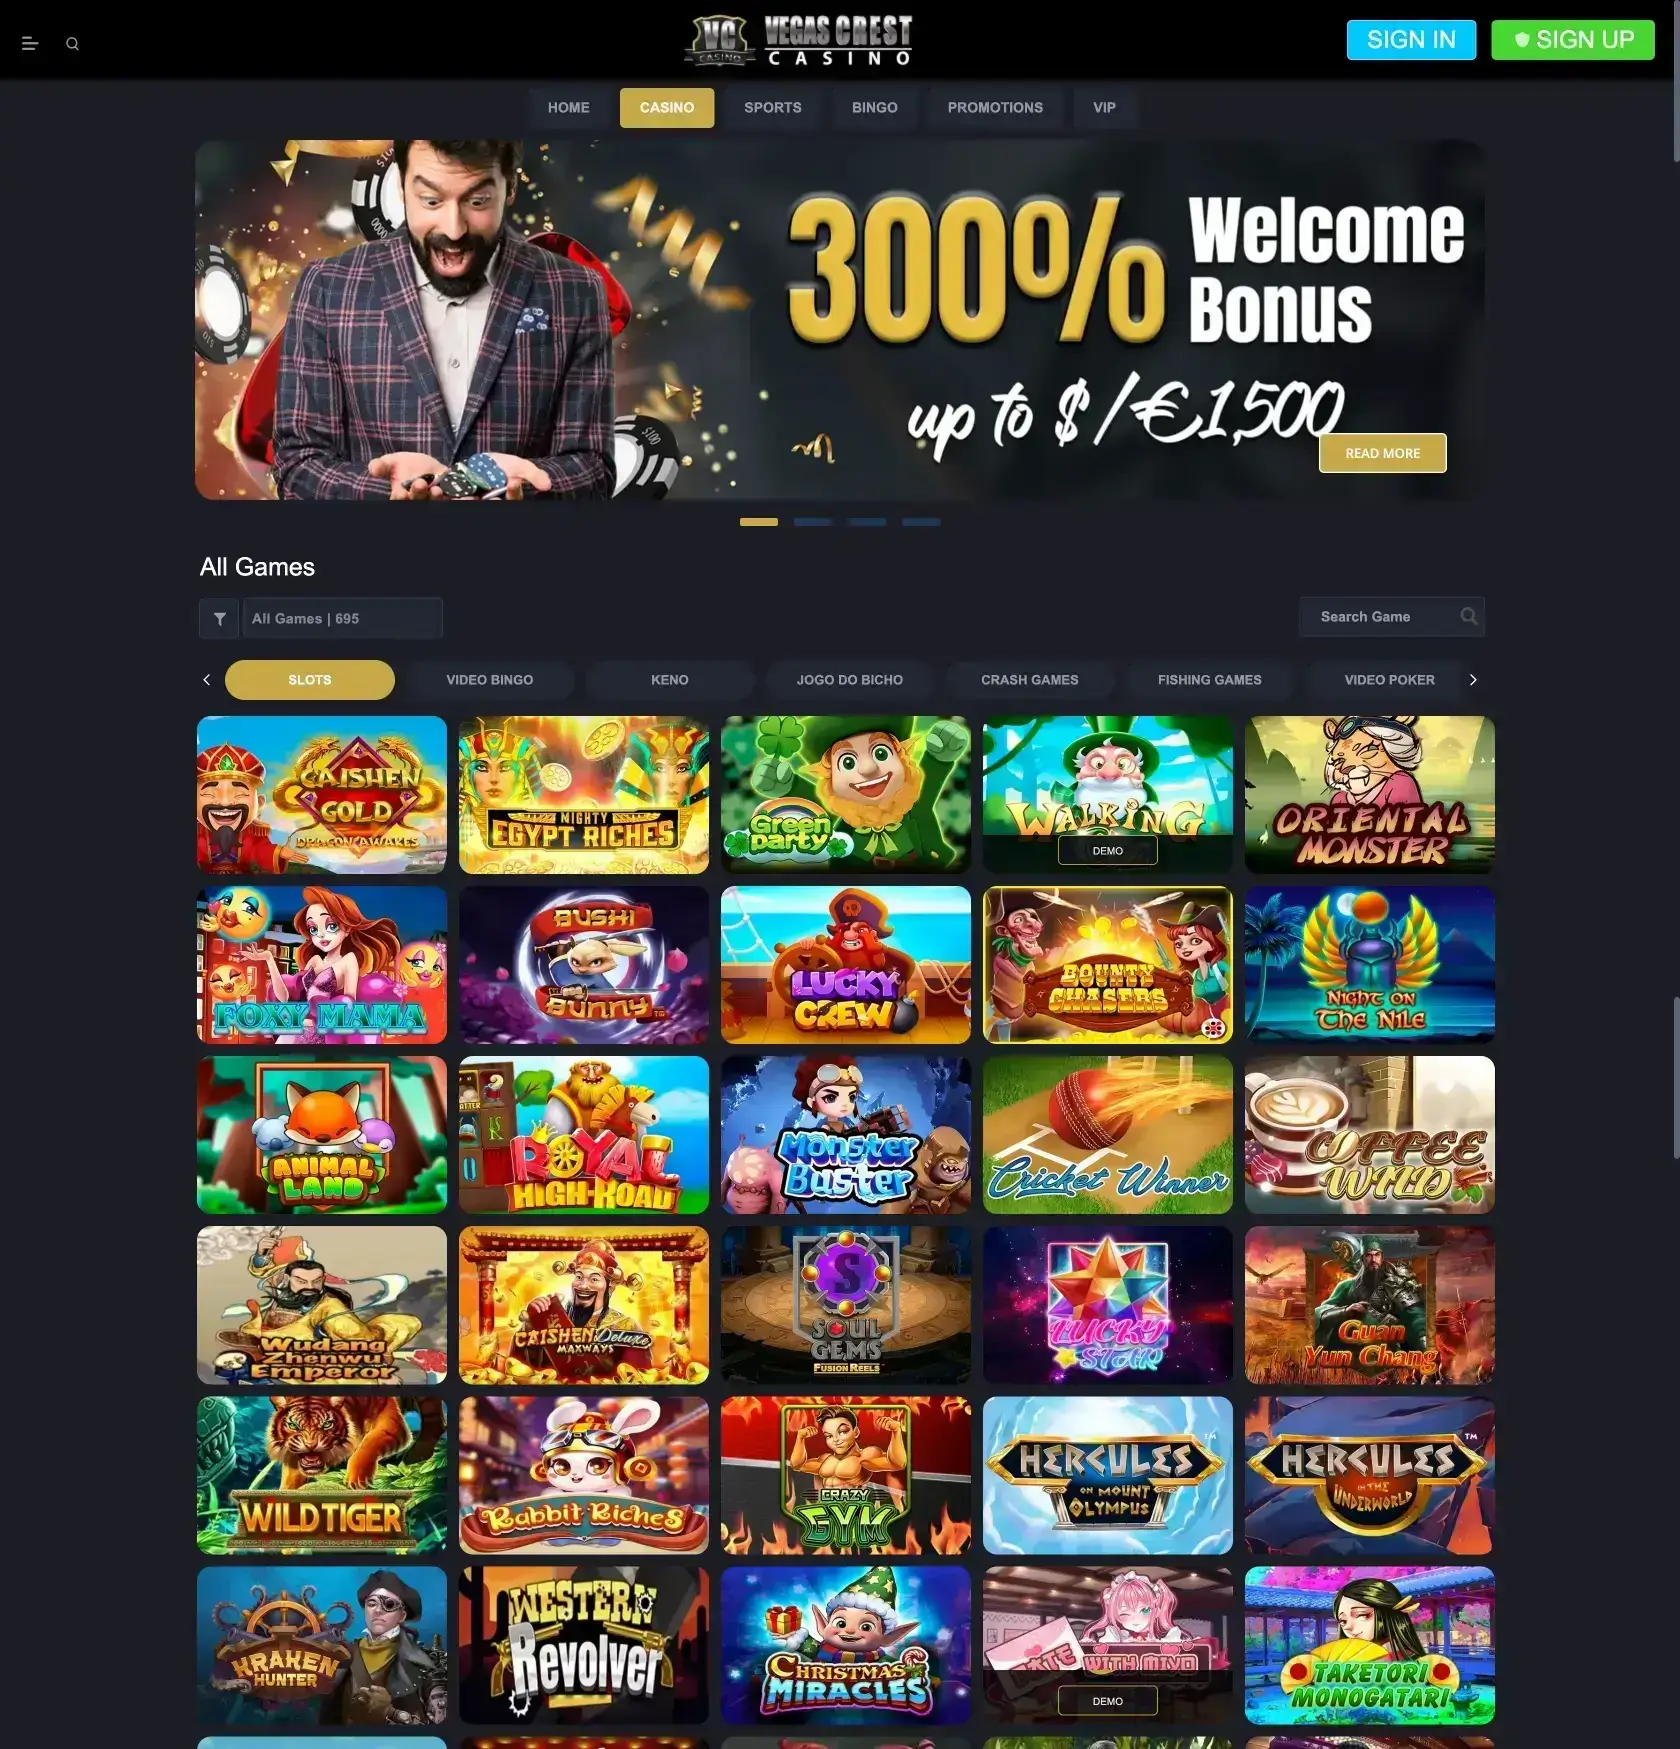 Vegas Crest Online Casino Games and Software